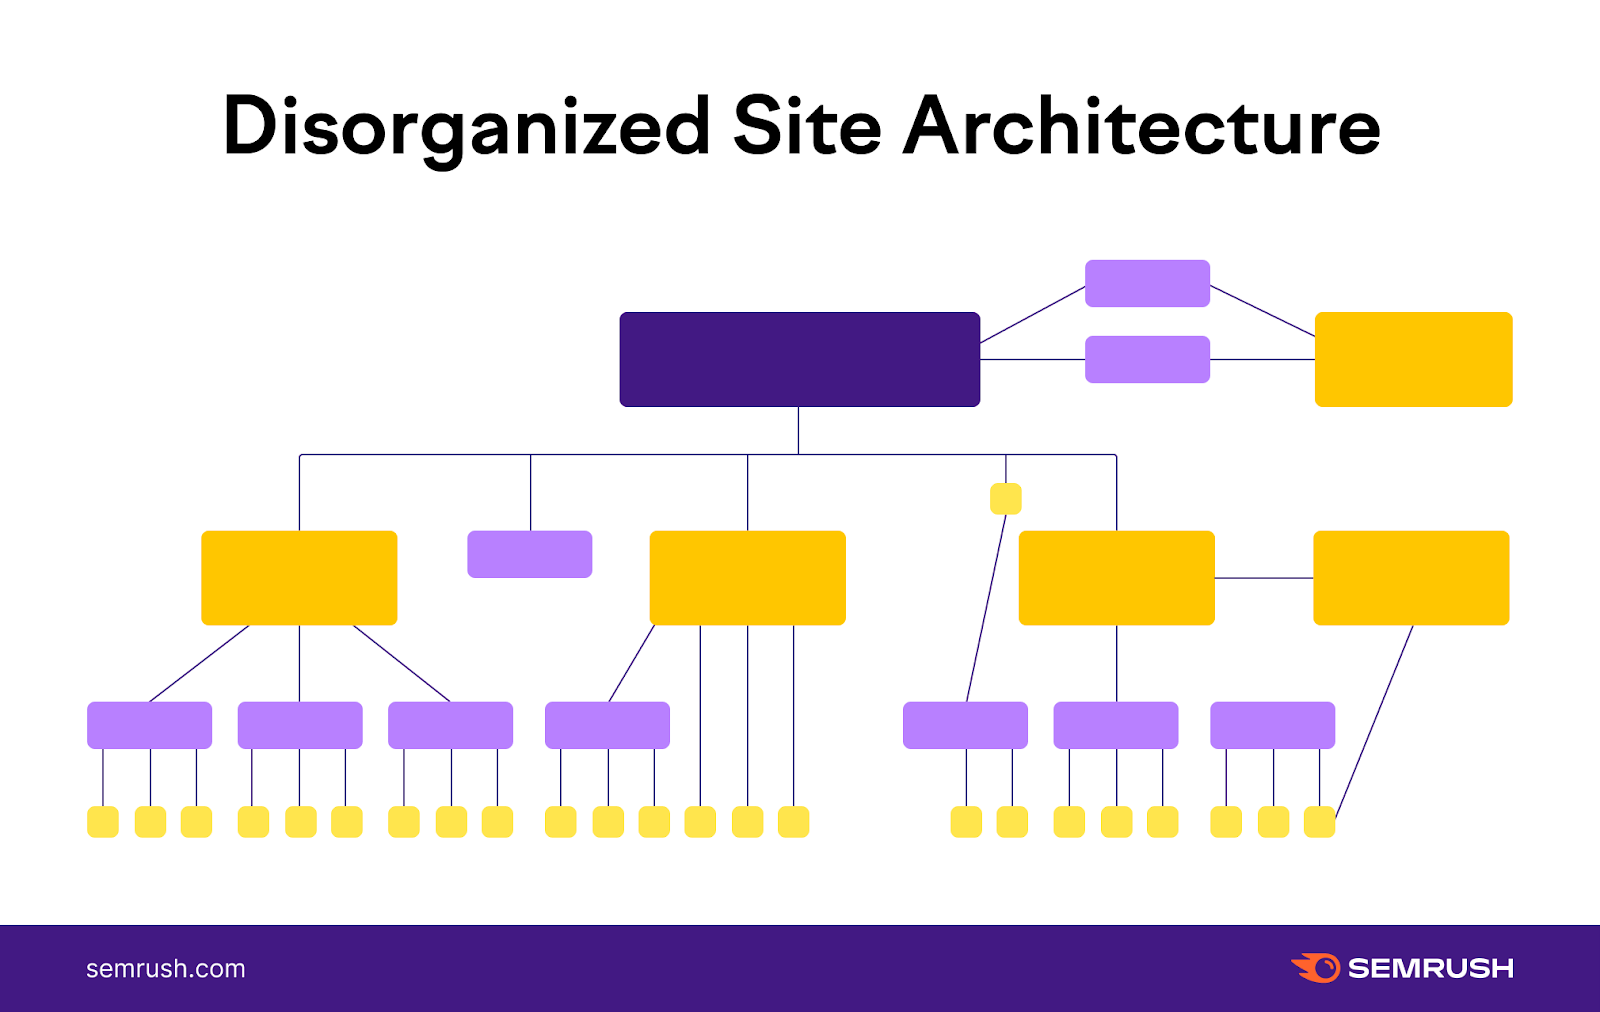 An infographic showing an example of disorganized site architecture